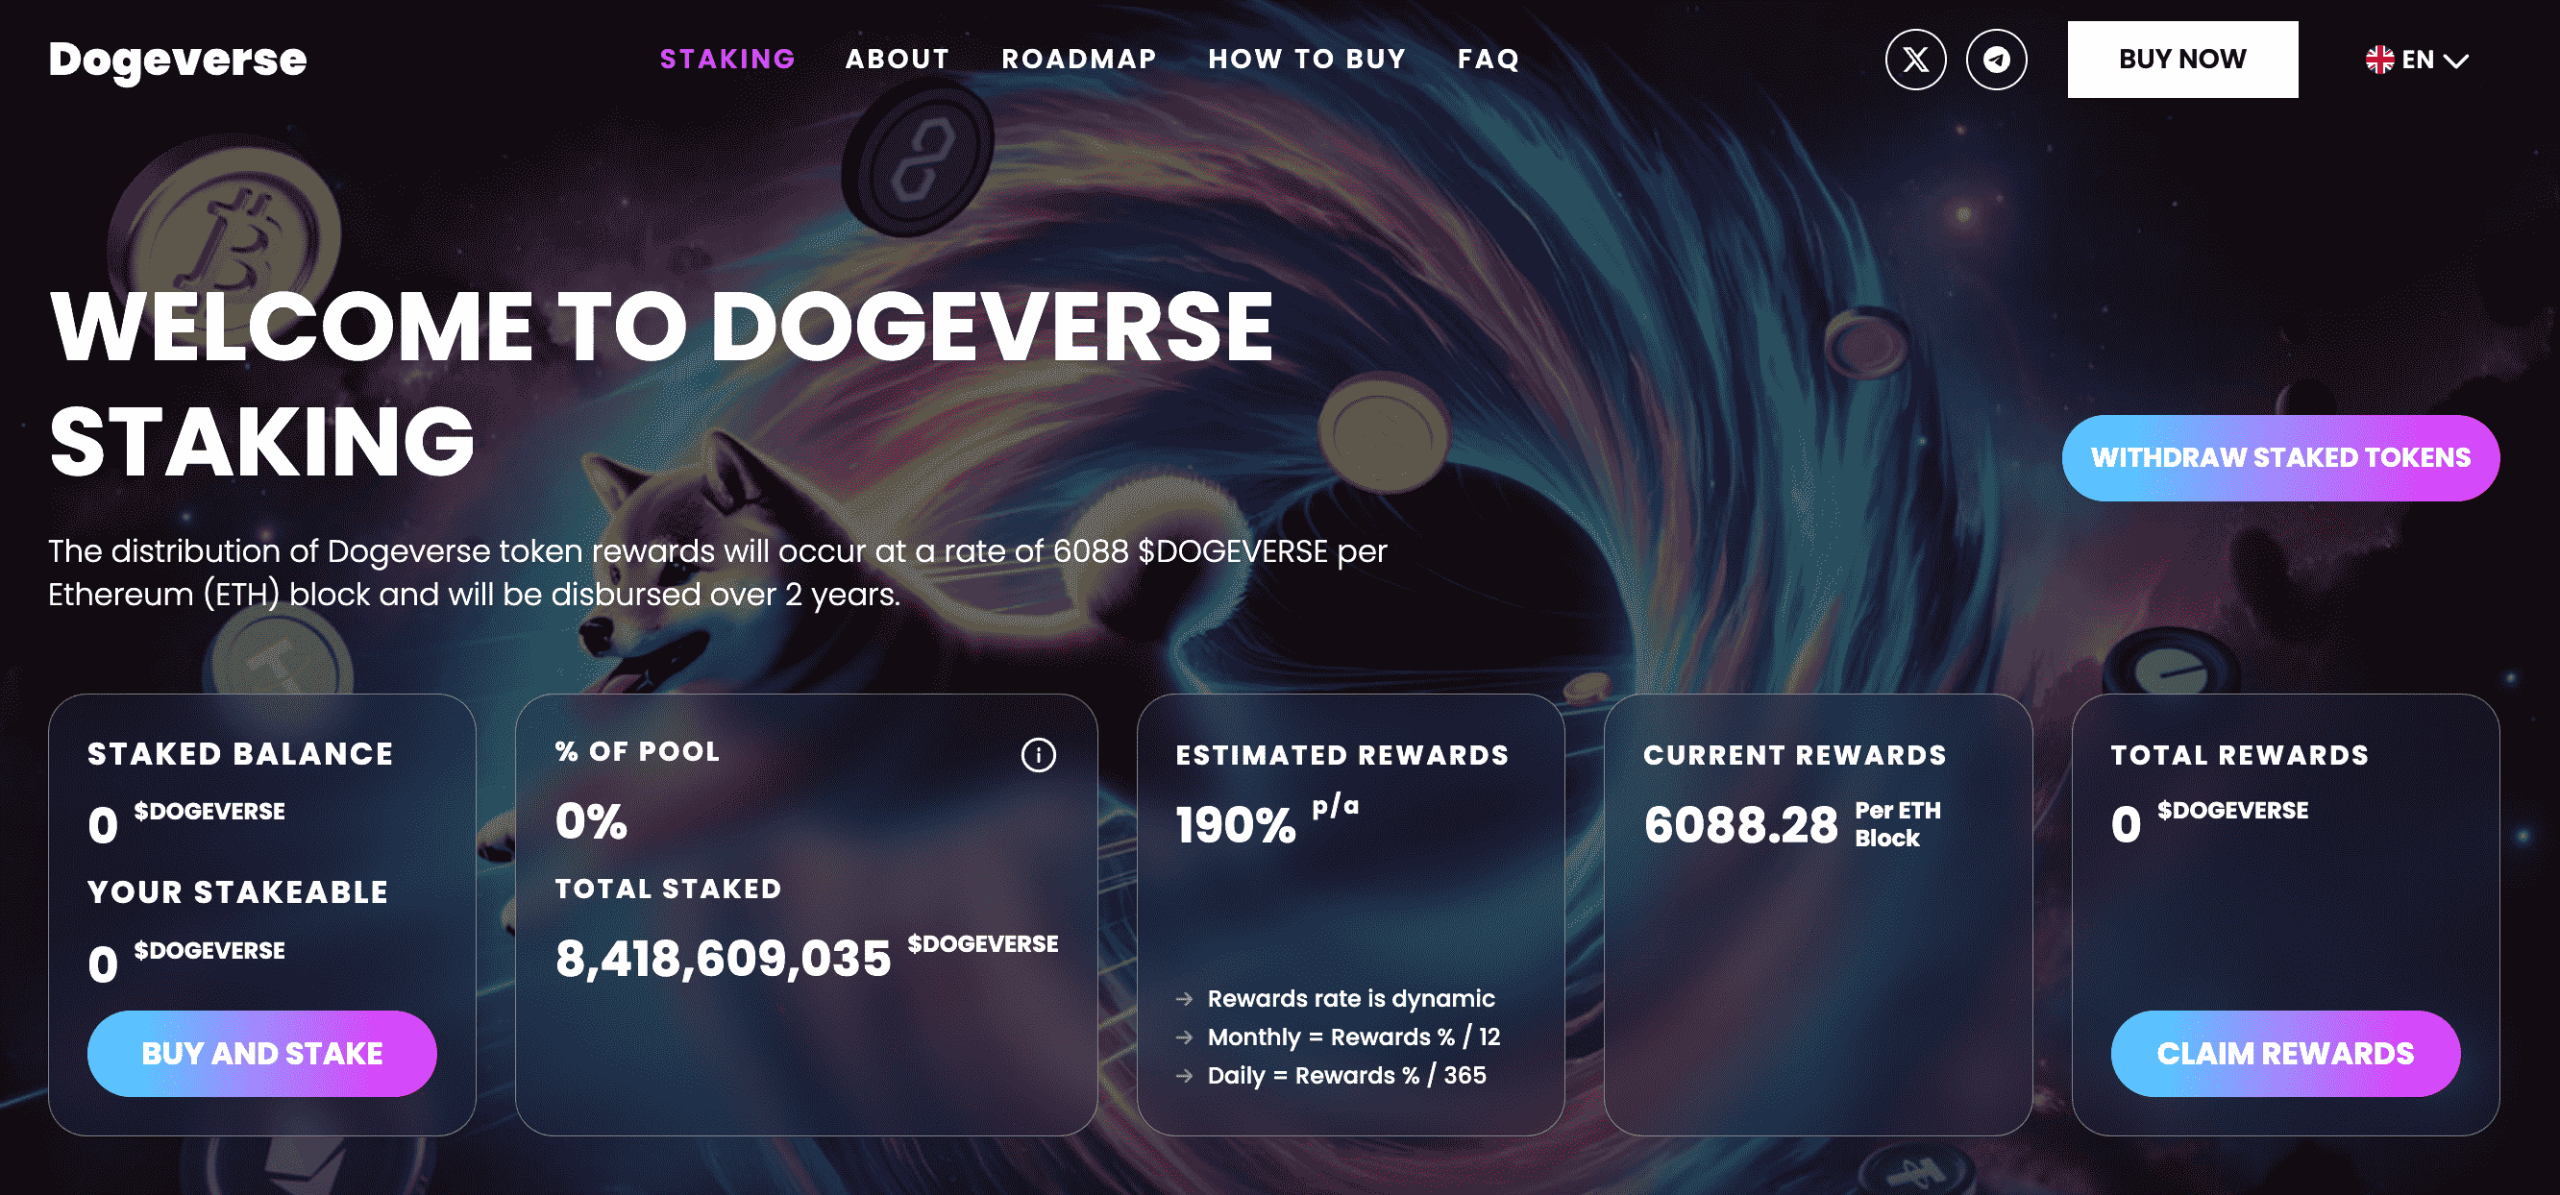 Dogeverse staking APYs